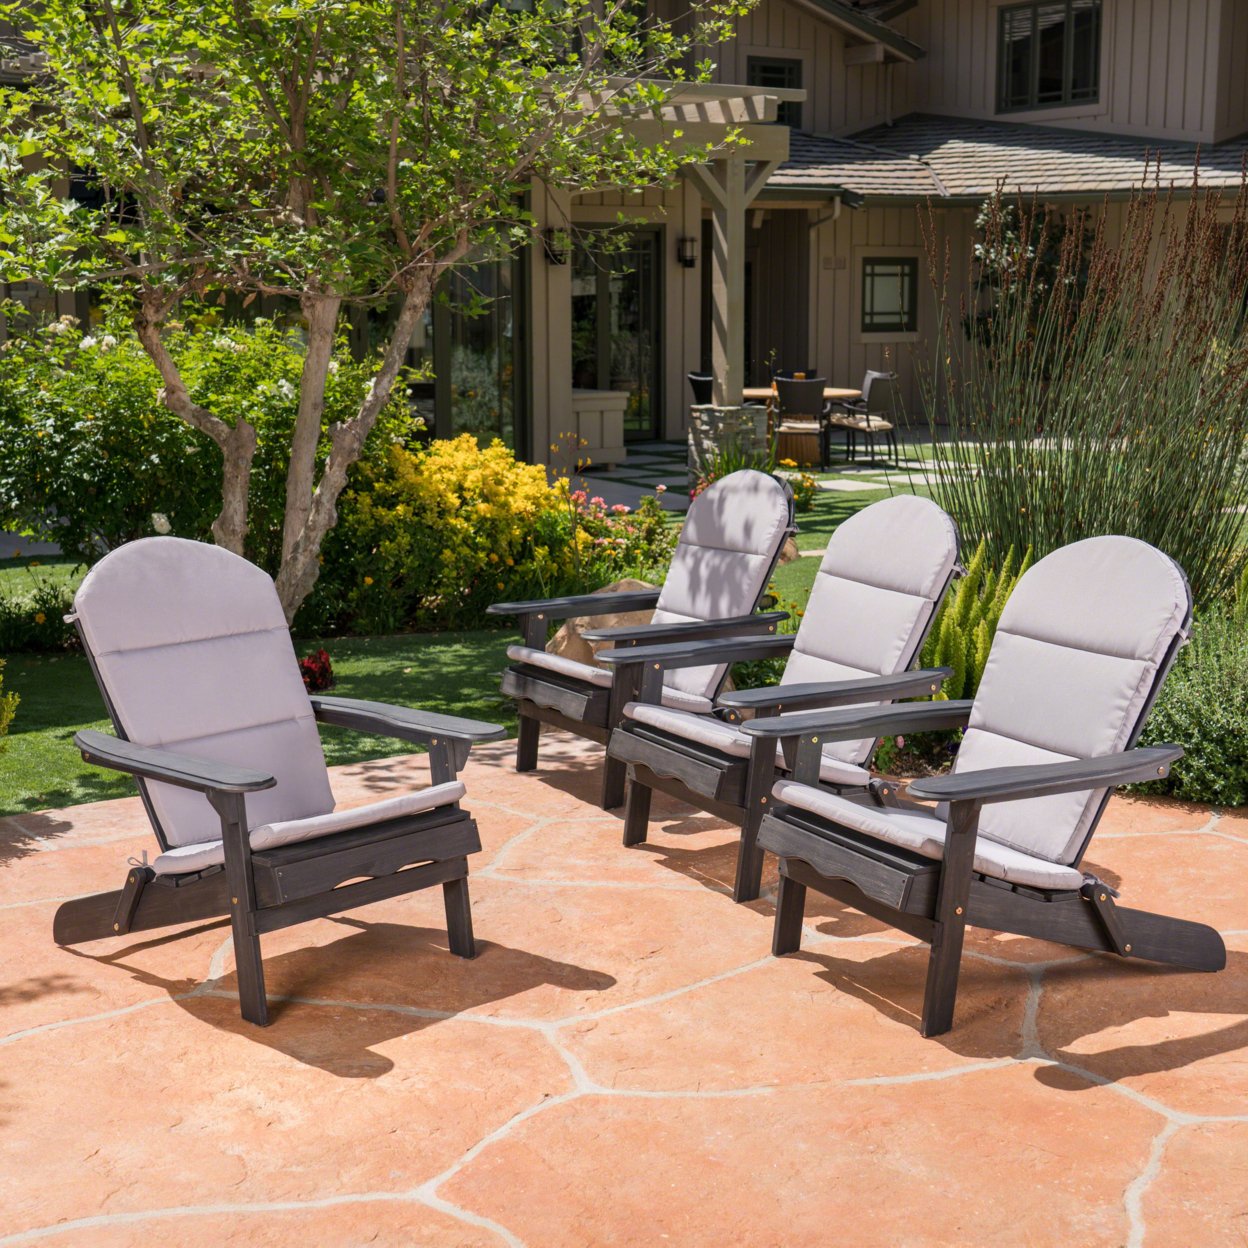 Nelie Outdoor Acacia Wood Adirondack Chairs With Cushions - Grey, Set Of 4